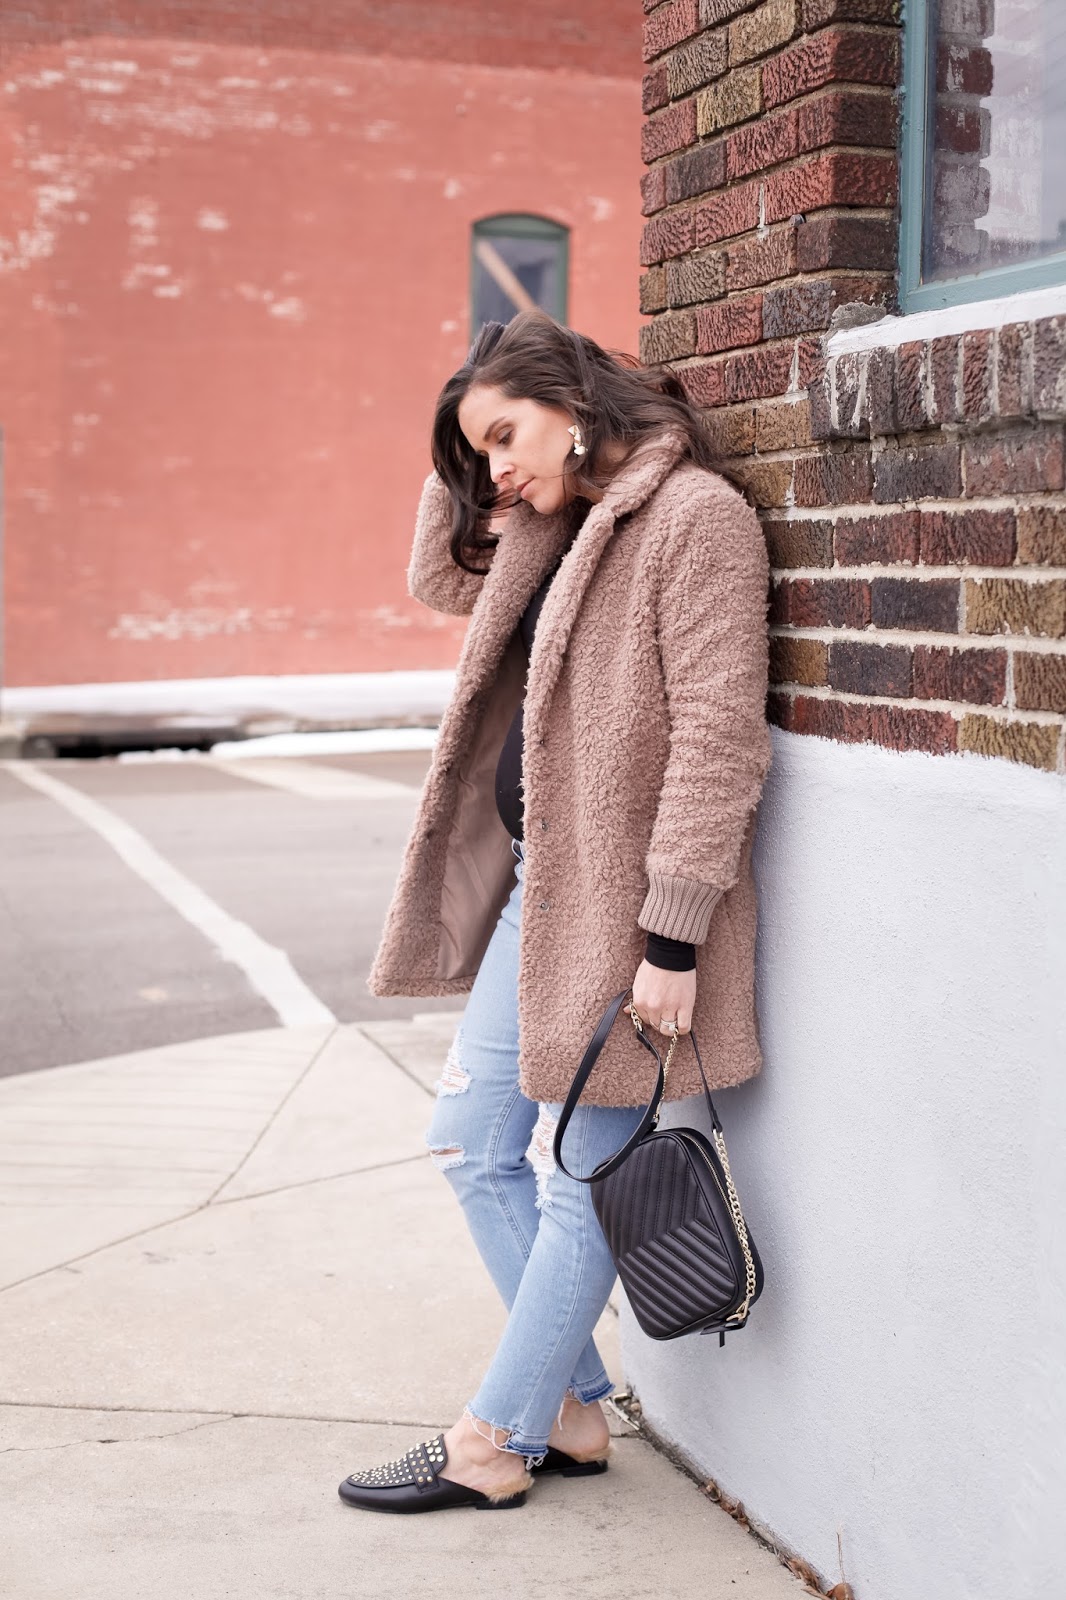 Styling a teddy coat with a baby bump